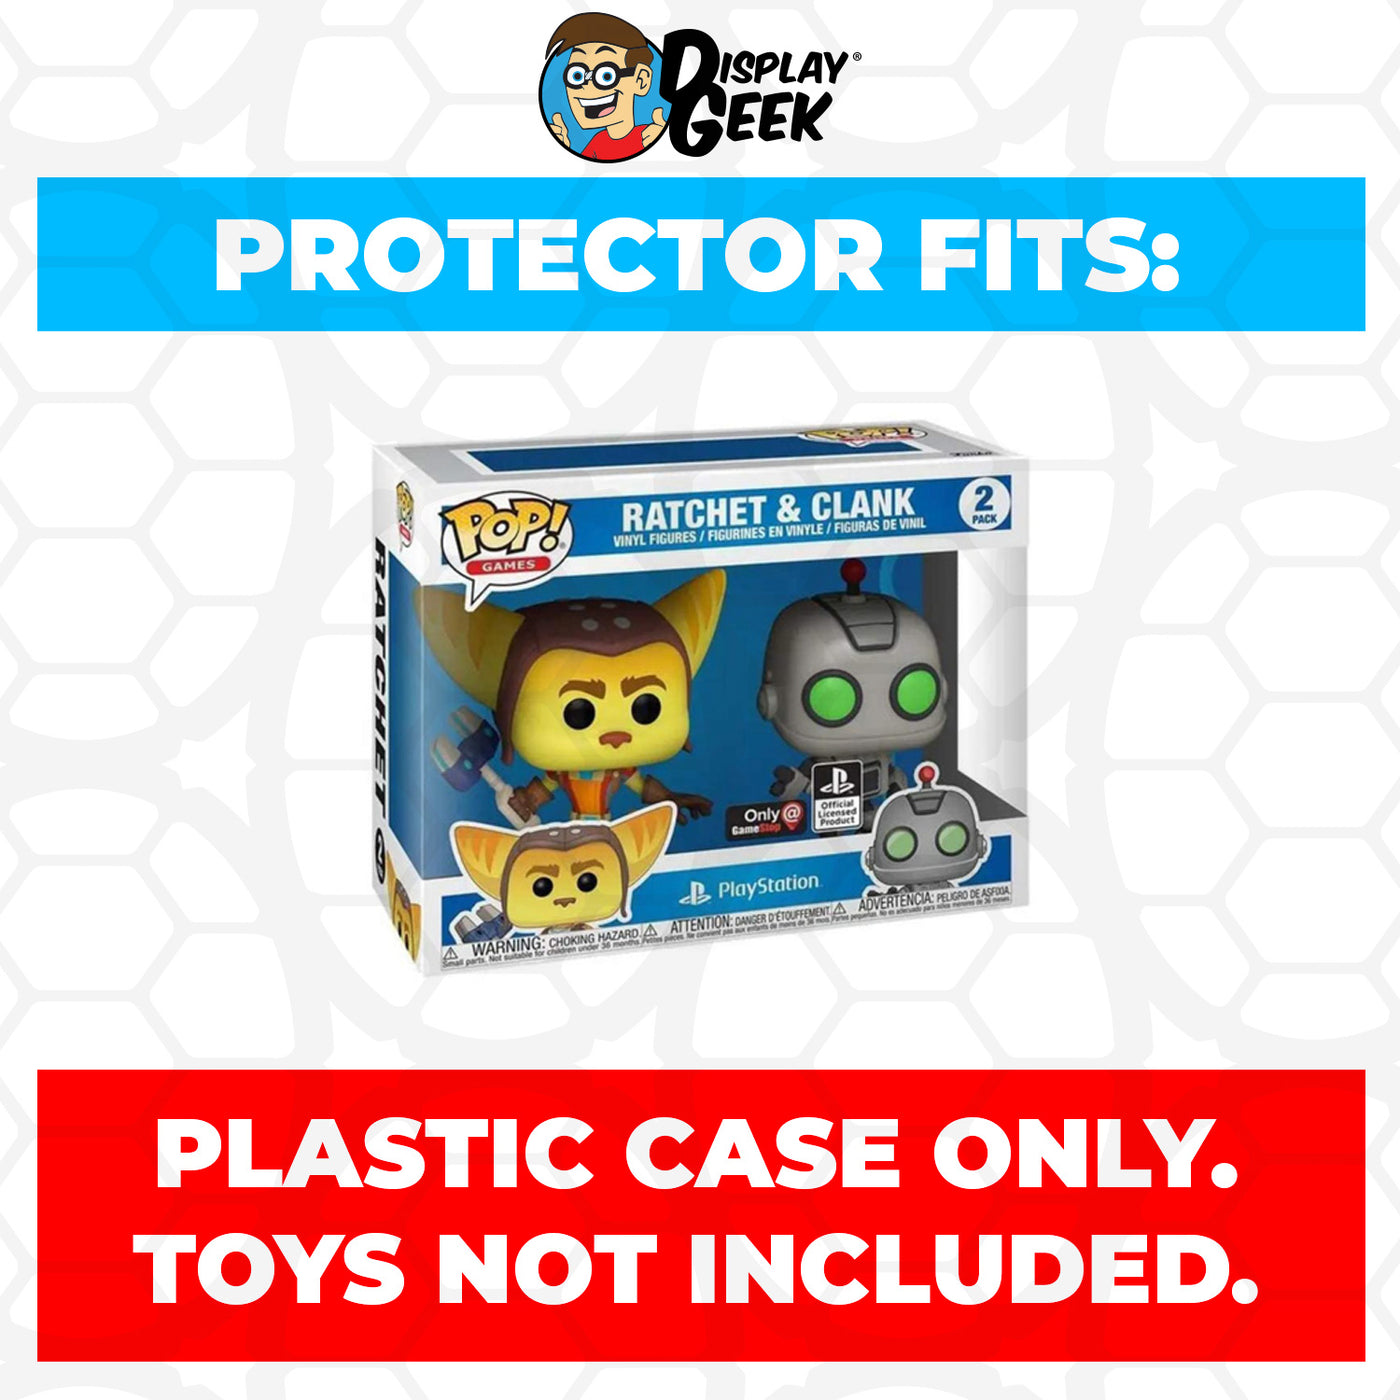 Pop Protector for 2 Pack Ratchet & Clank Funko Pop on The Protector Guide App by Display Geek